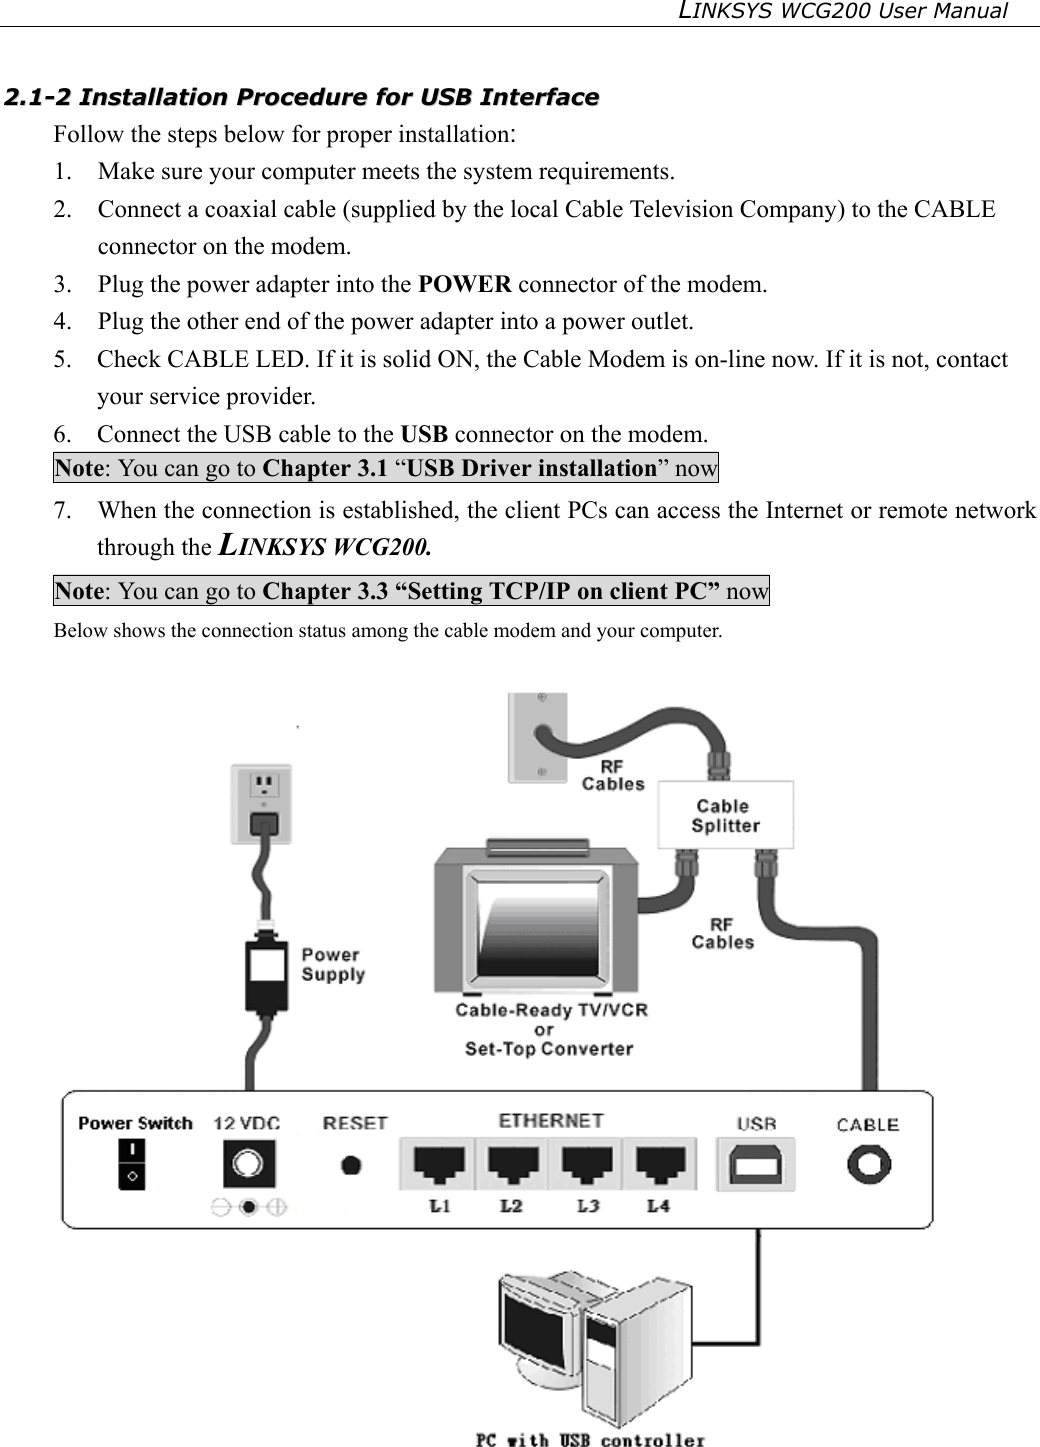 LINKSYS WCG200 User Manual     22..11--22  IInnssttaallllaattiioonn  PPrroocceedduurree  ffoorr  UUSSBB  IInntteerrffaaccee  Follow the steps below for proper installation: 1.  Make sure your computer meets the system requirements. 2.  Connect a coaxial cable (supplied by the local Cable Television Company) to the CABLE connector on the modem.   3.  Plug the power adapter into the POWER connector of the modem. 4.  Plug the other end of the power adapter into a power outlet. 5.    Check CABLE LED. If it is solid ON, the Cable Modem is on-line now. If it is not, contact your service provider. 6.    Connect the USB cable to the USB connector on the modem. Note: You can go to Chapter 3.1 “USB Driver installation” now 7.    When the connection is established, the client PCs can access the Internet or remote network through the LINKSYS WCG200. Note: You can go to Chapter 3.3 “Setting TCP/IP on client PC” now Below shows the connection status among the cable modem and your computer.     